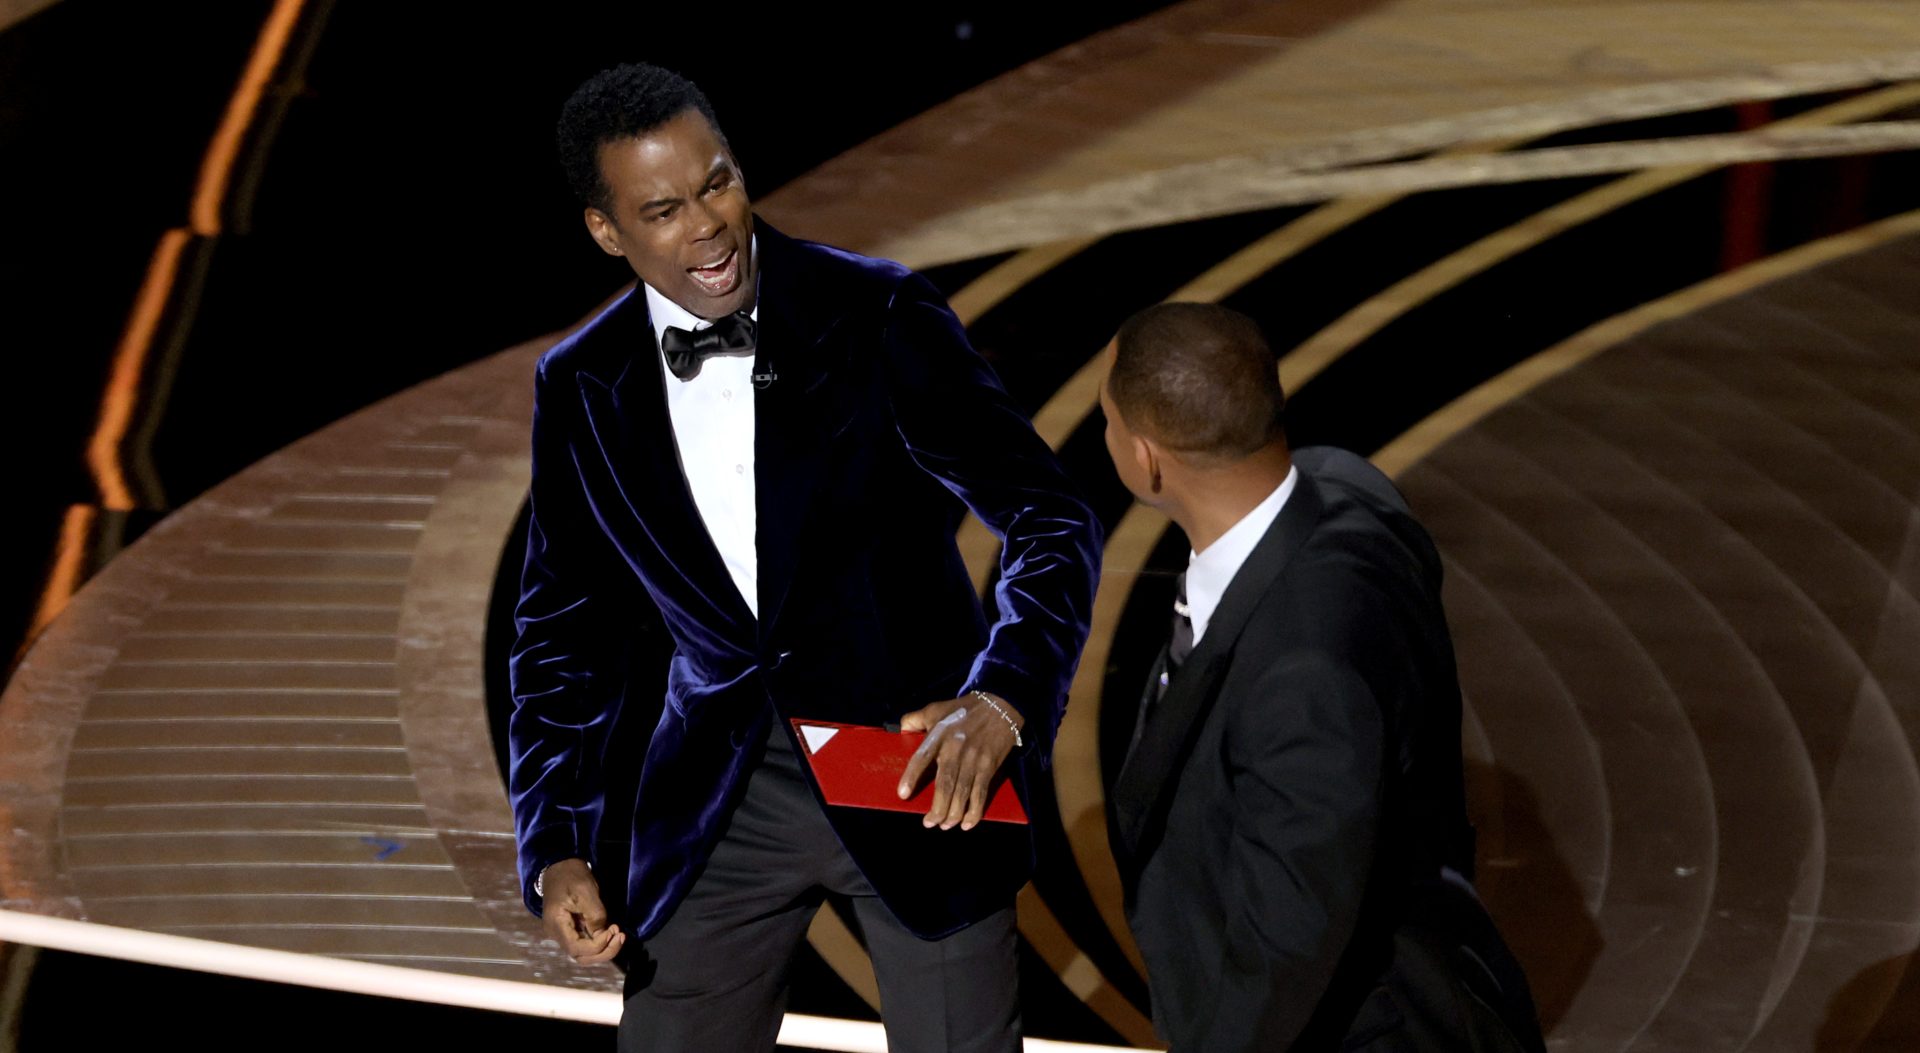 Twitter Reacts To Chris Rock’s Alleged Jokes About Will Smith Slap